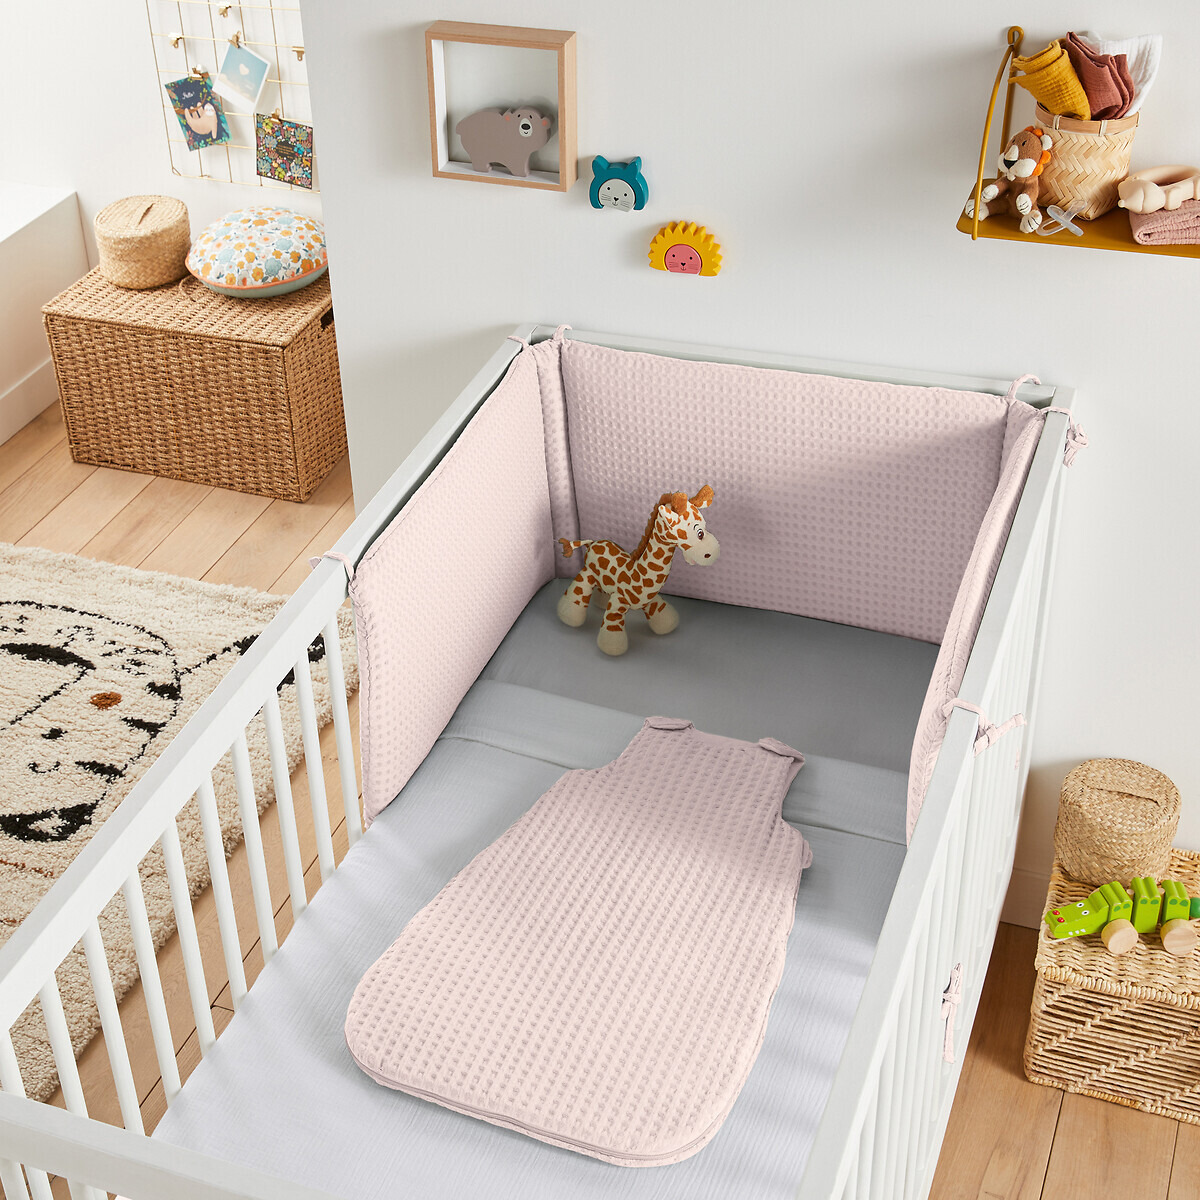 Tifly Honeycomb 100% Cotton Bed Bumper - image 1